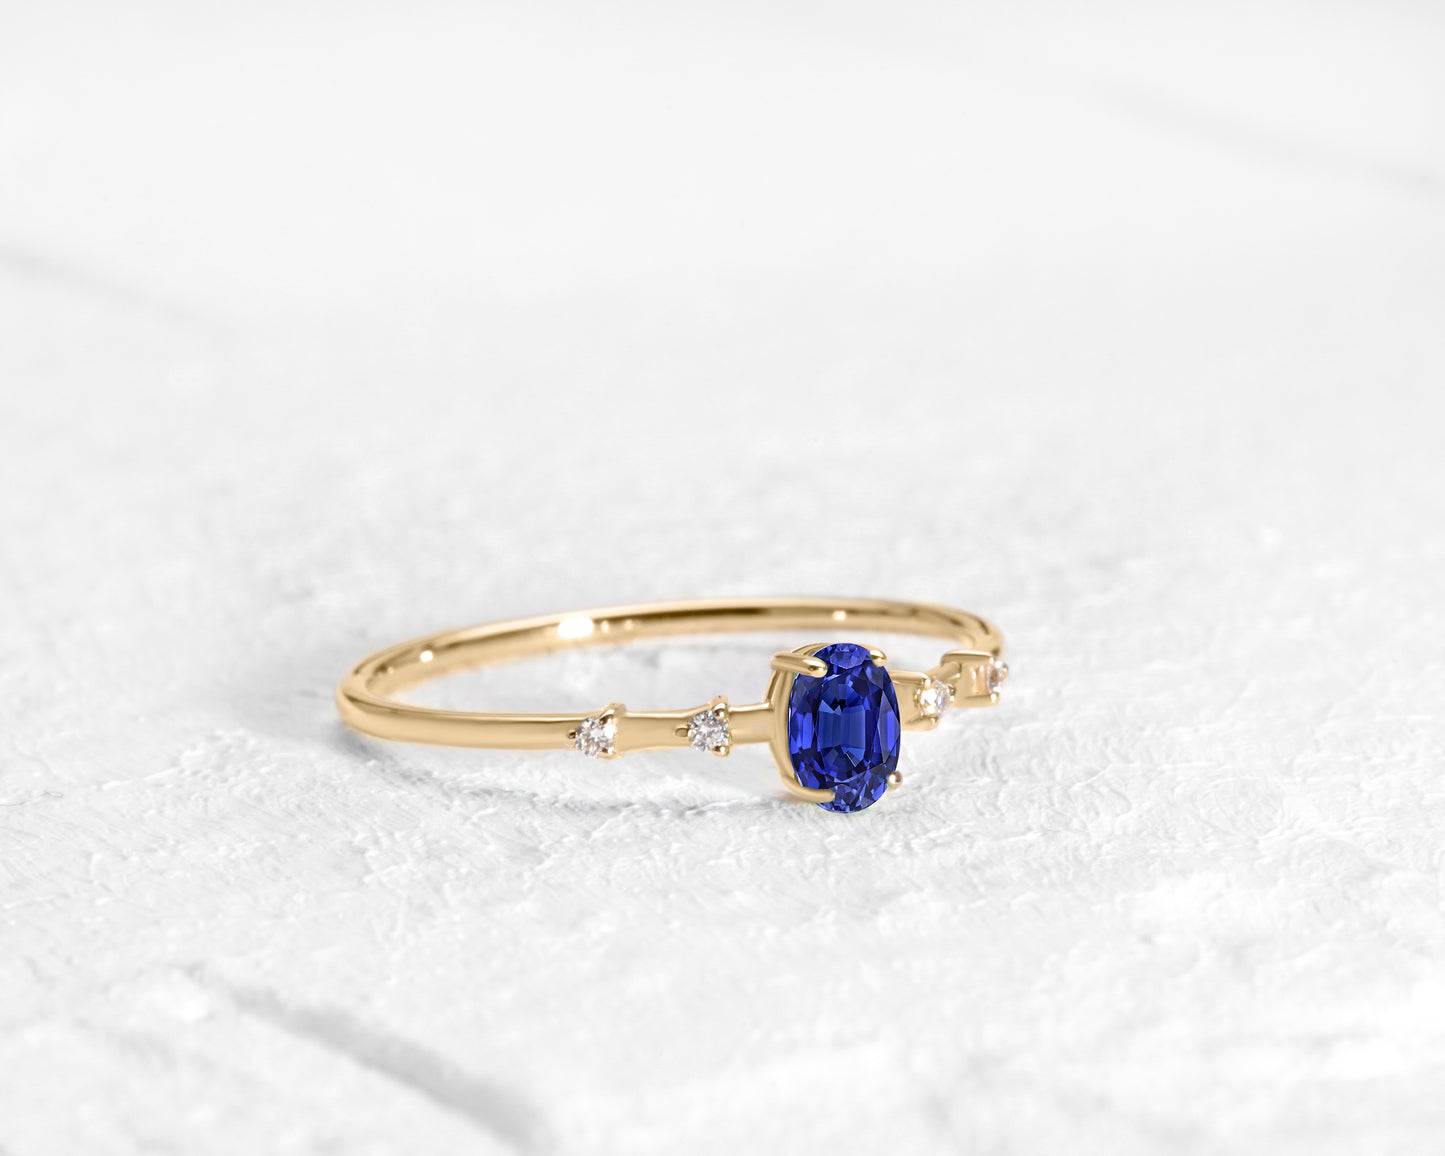 Dainty Ring, Prong Setting Oval cut Sapphire and Diamond Ring , 14K Yellow Solid Gold